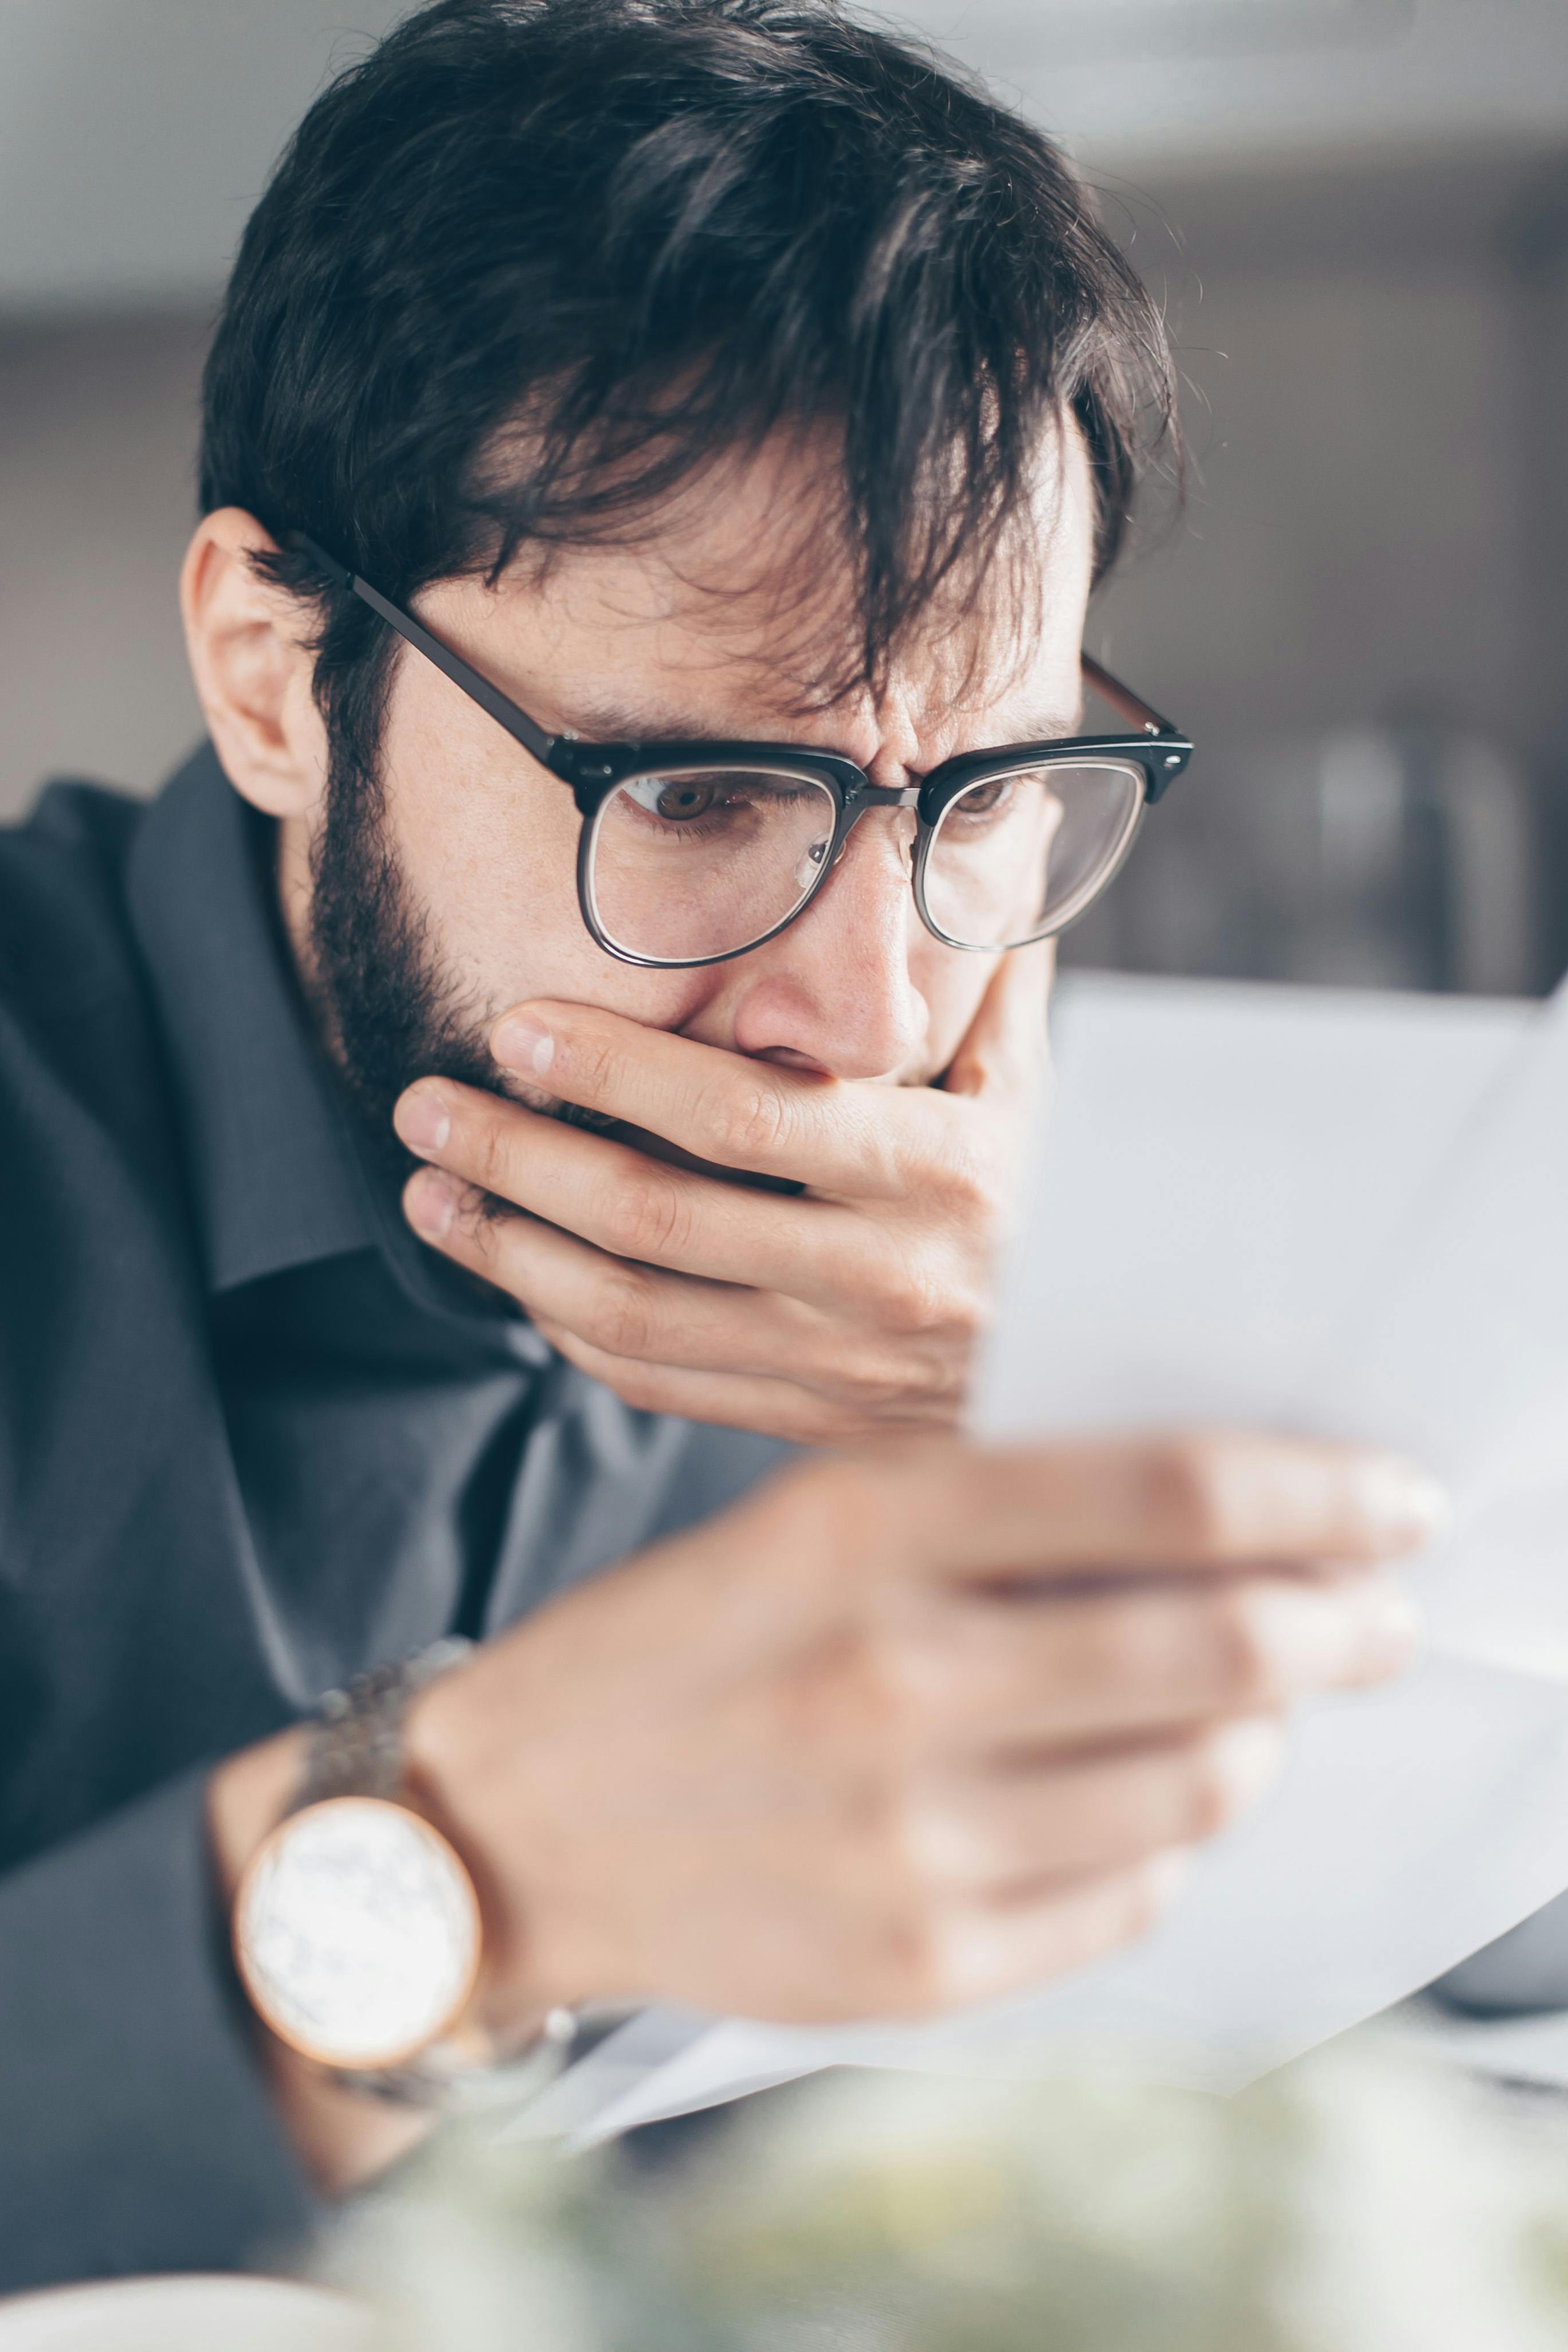 A shocked man with his mouth covered while reading something on a paper | Source: Pexels